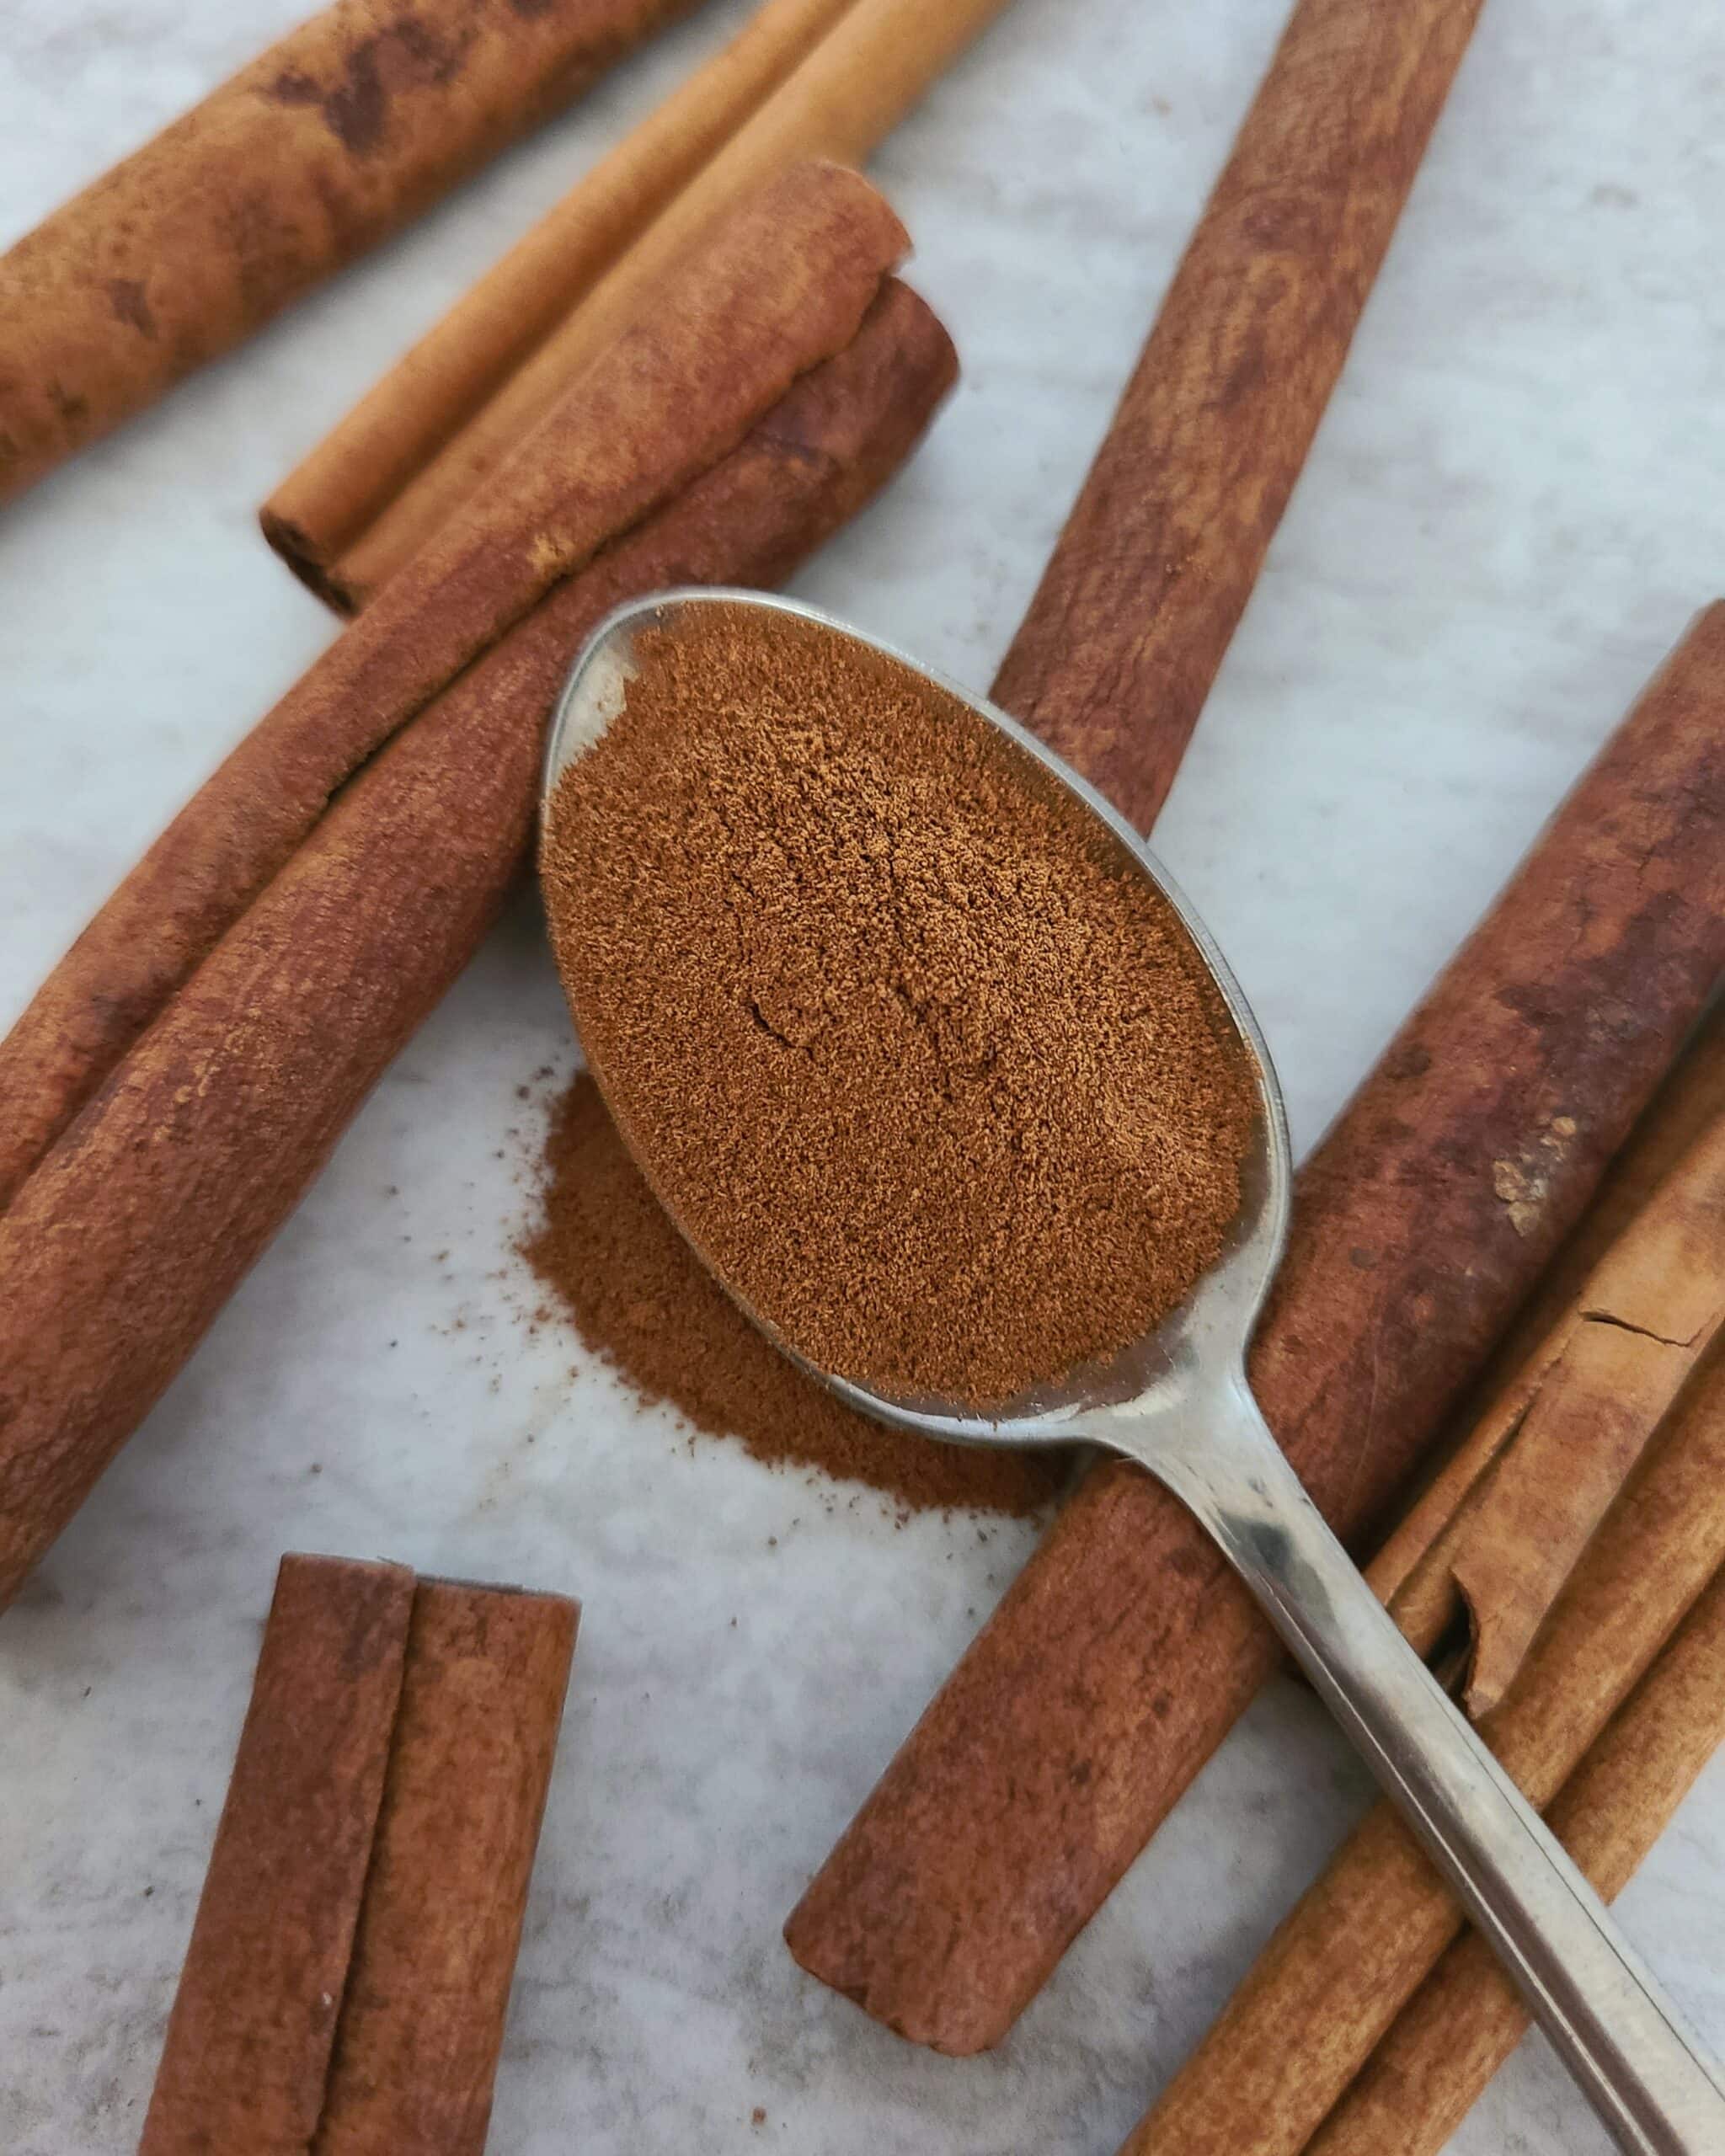 A silver spoon filled with ground cinnamon resting on a pile of cinnamon sticks.